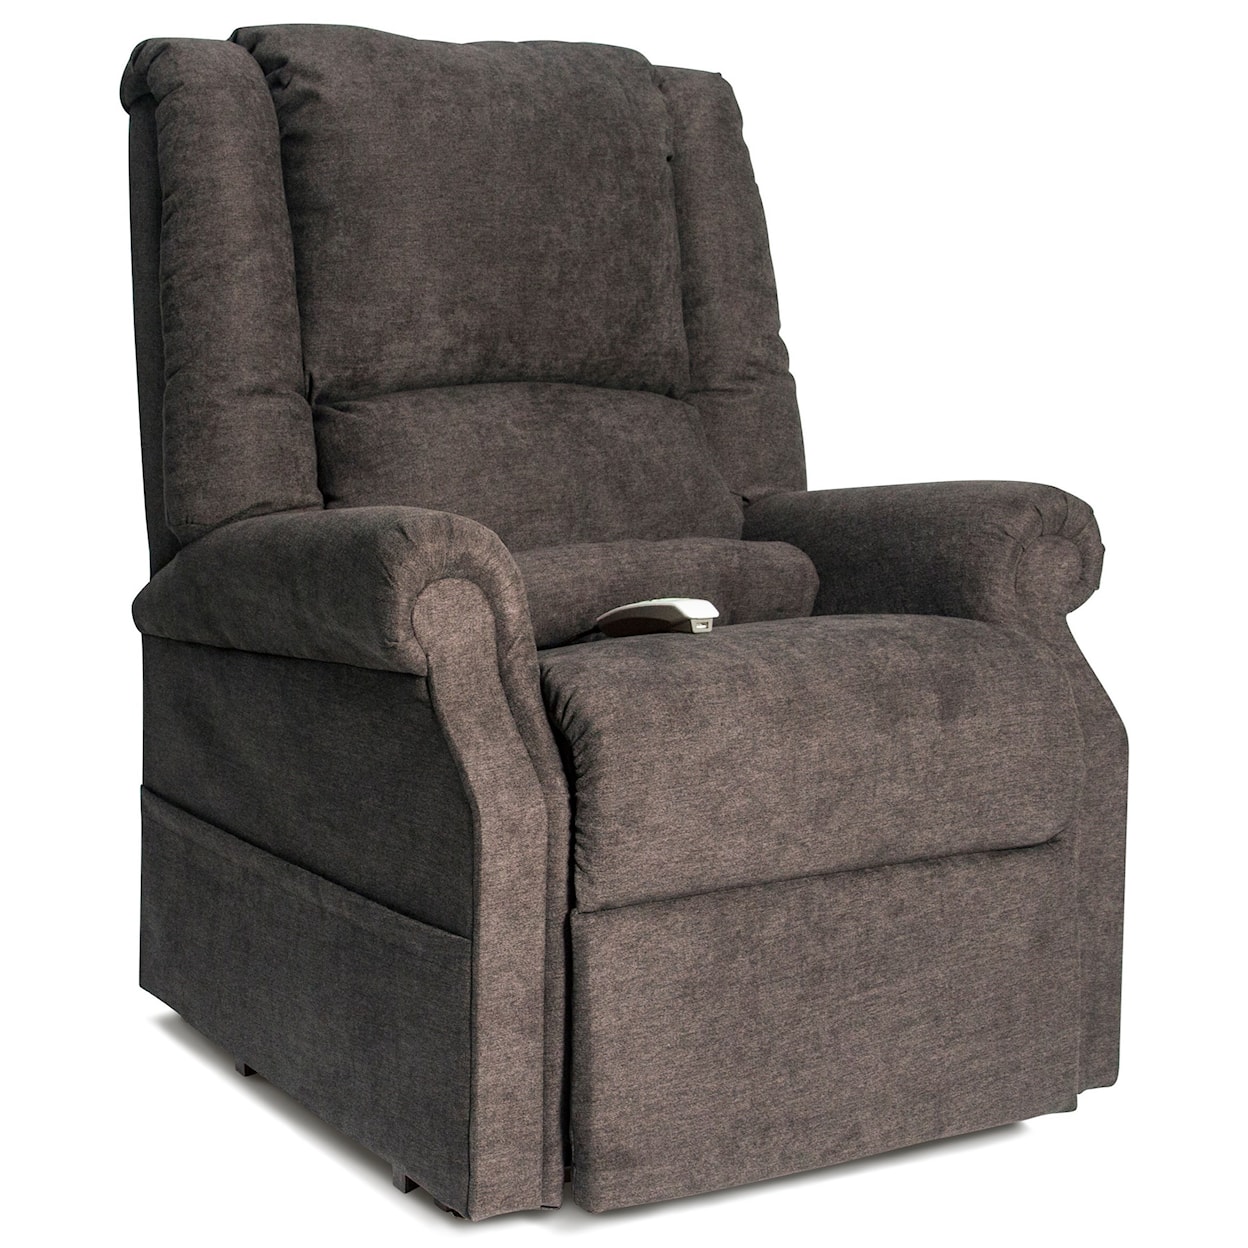 Ultimate Power Recliner Lift Chairs Juno Lay-Flat Chaise Lounger